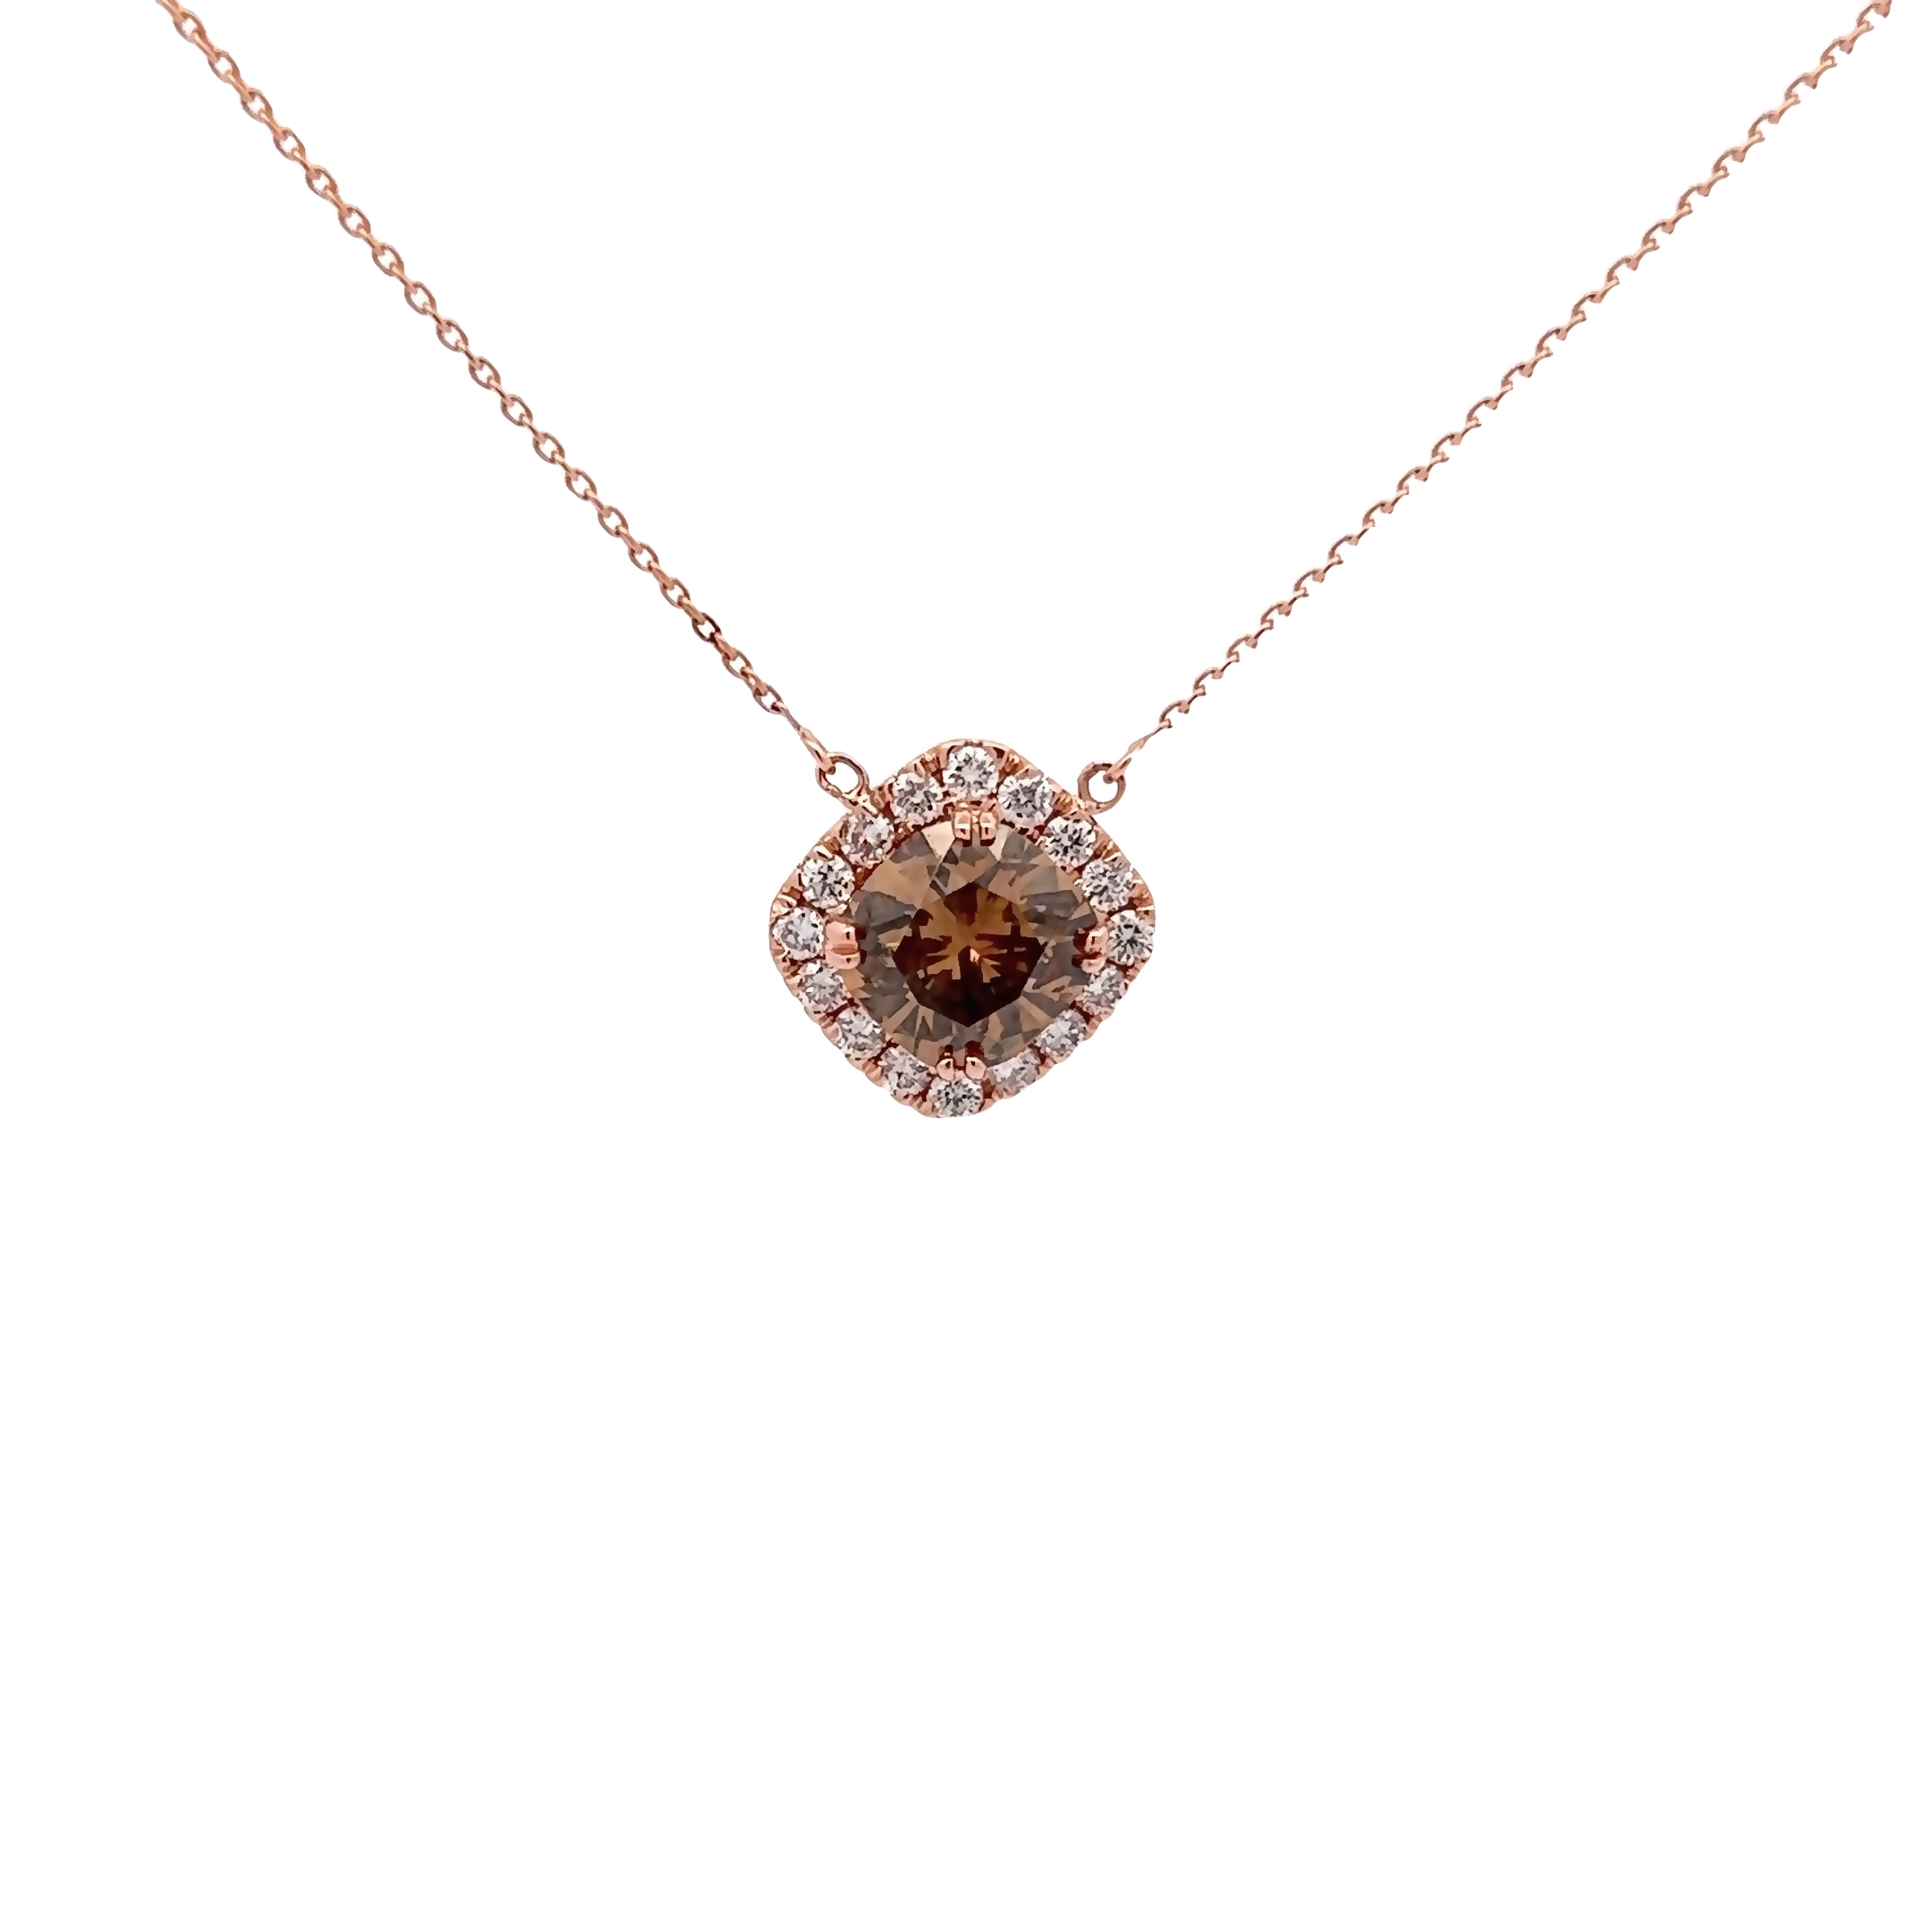 14 Karat rose gold halo pendant with One 2.29Ct cushion chocolate Diamond and 16=0.40 total weight round brilliant G VS Diamonds